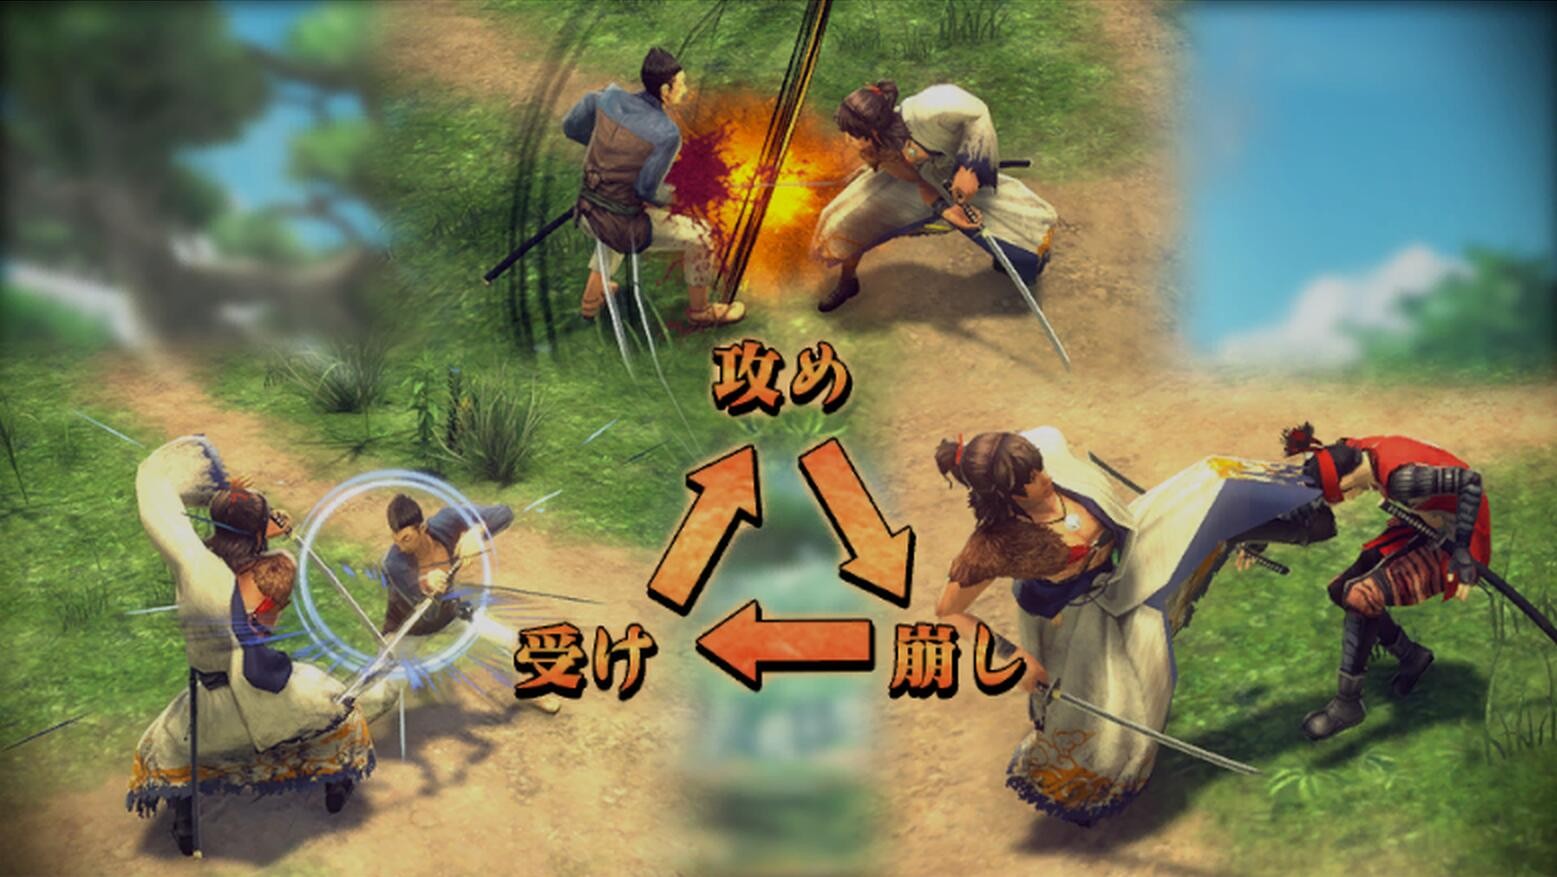 Katana Kami: A Way Of The Samurai Story, Way Of Samurai Gaiden: Katanakami, Katanakami, Acquire, Spike Chunsoft, Japan, Asia, PS4, playstation 4, Switch, Nintendo Switch, release date, gameplay, features, price, pre-order now, trailer, Multi-language, english, Japanese, Traditional Chinese